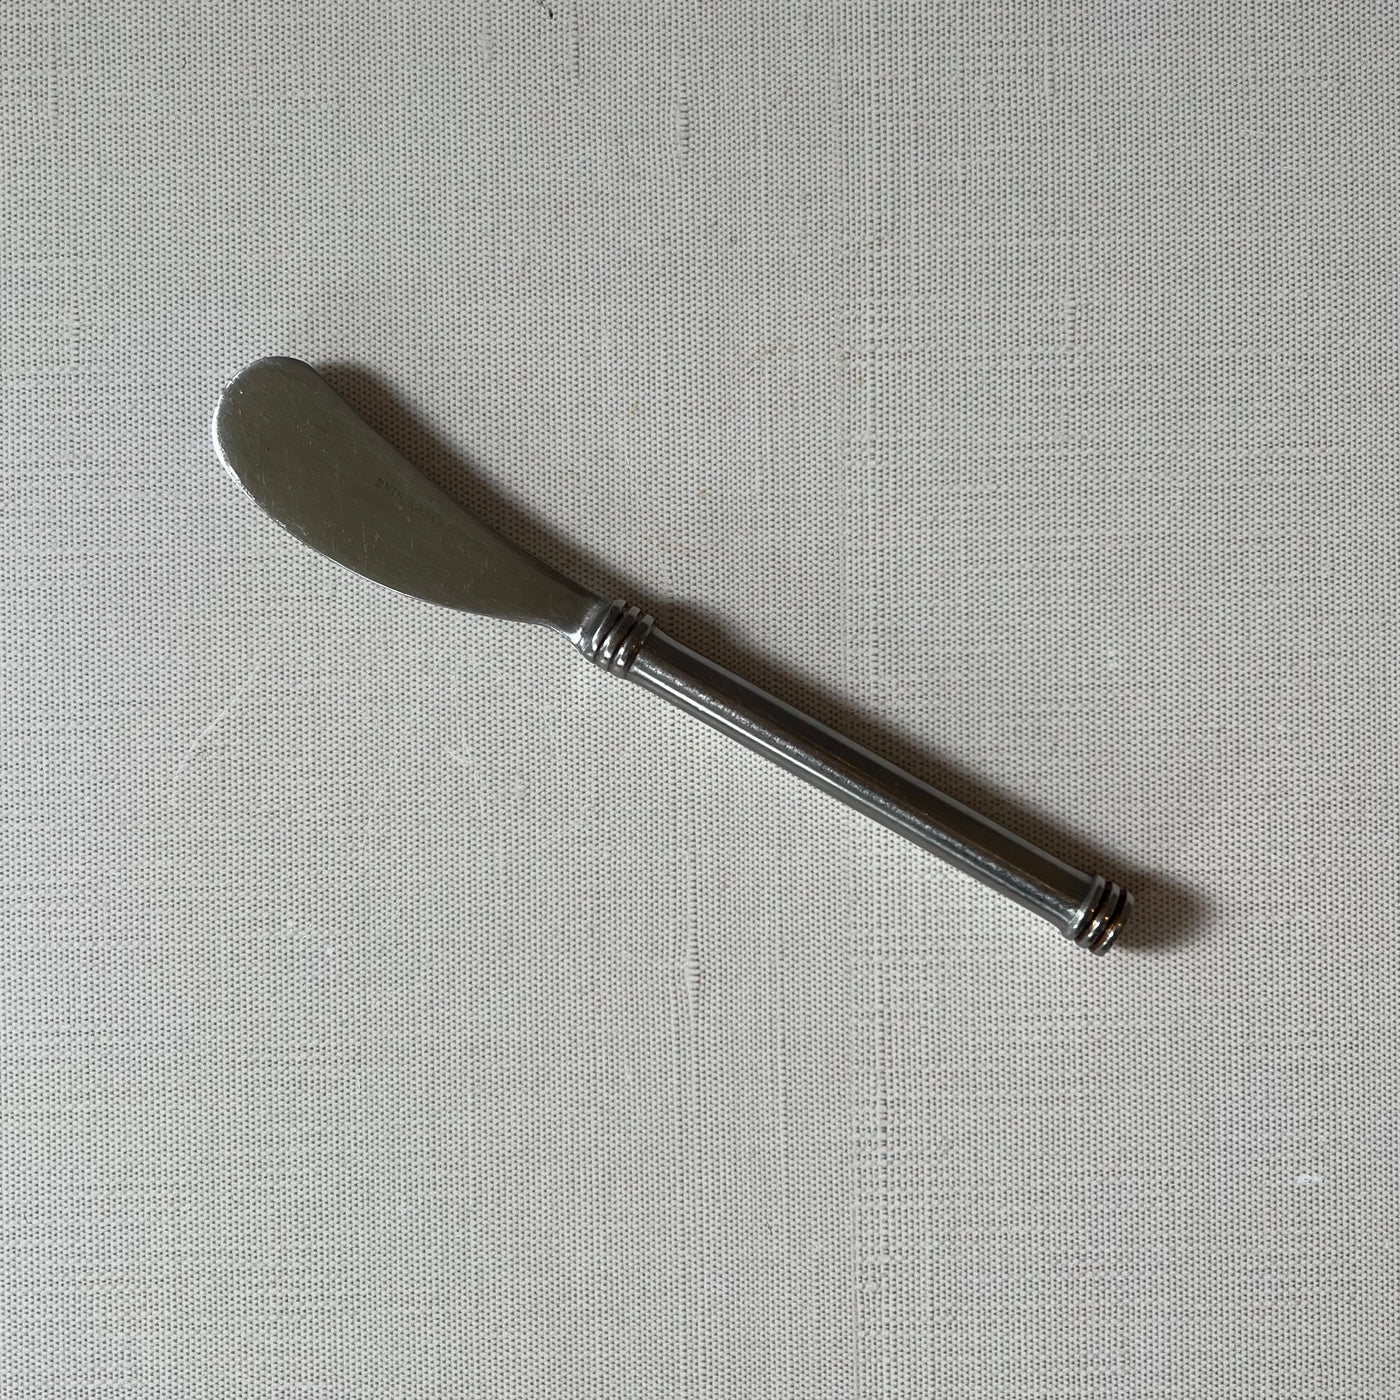 Stainless steel spreader knife about 4 inches long